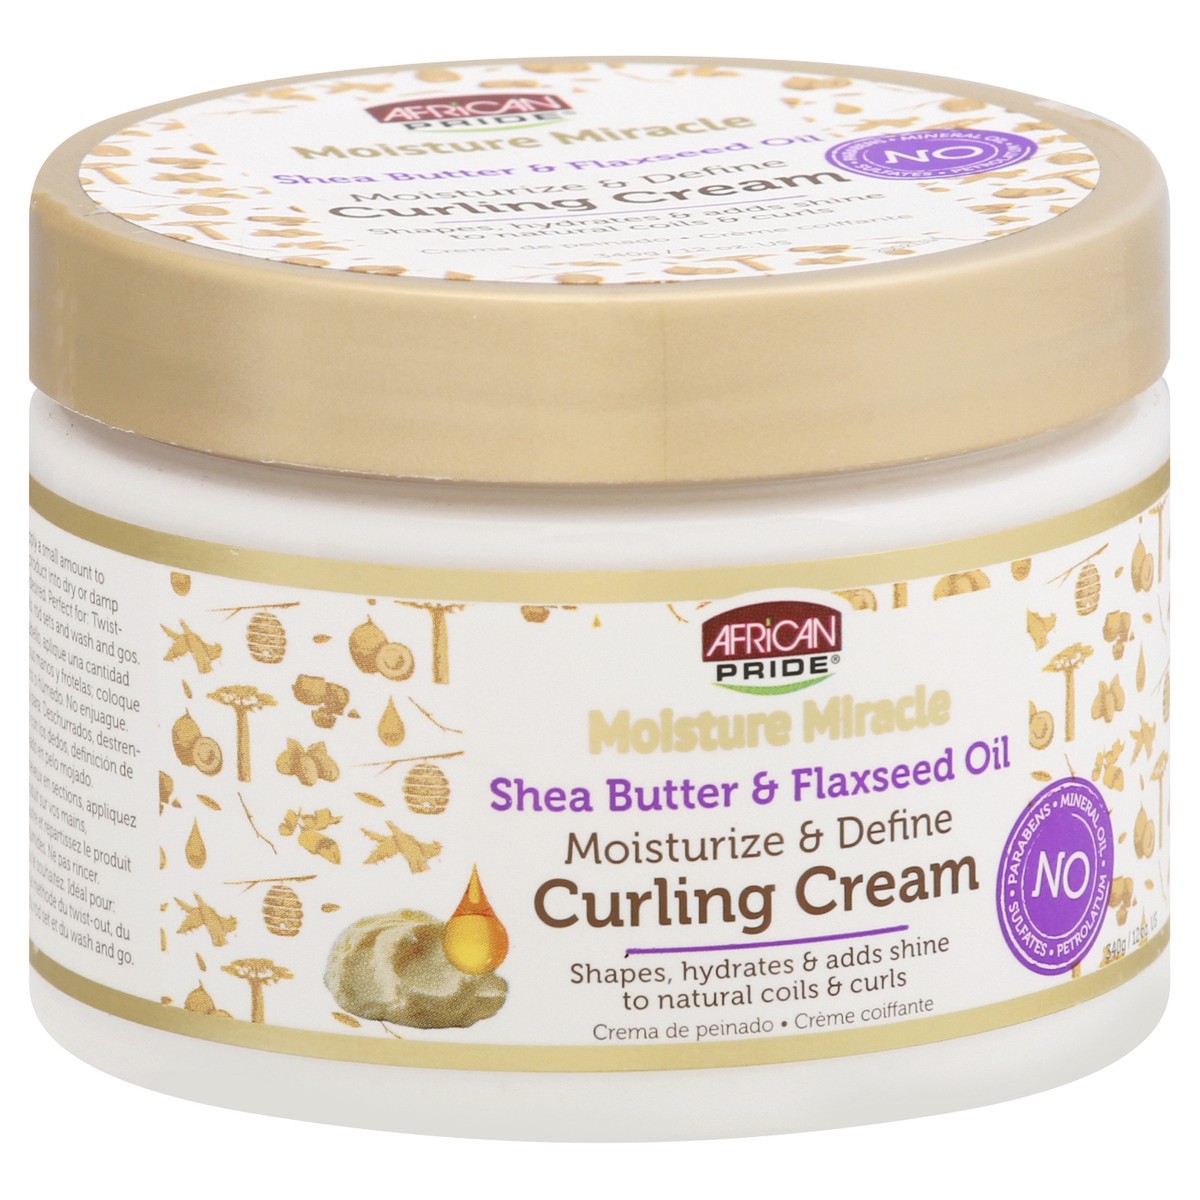 slide 9 of 9, African Pride Moisture Miracle Shea Butter And Flaxseed Oiil Curling Cream, 12 oz